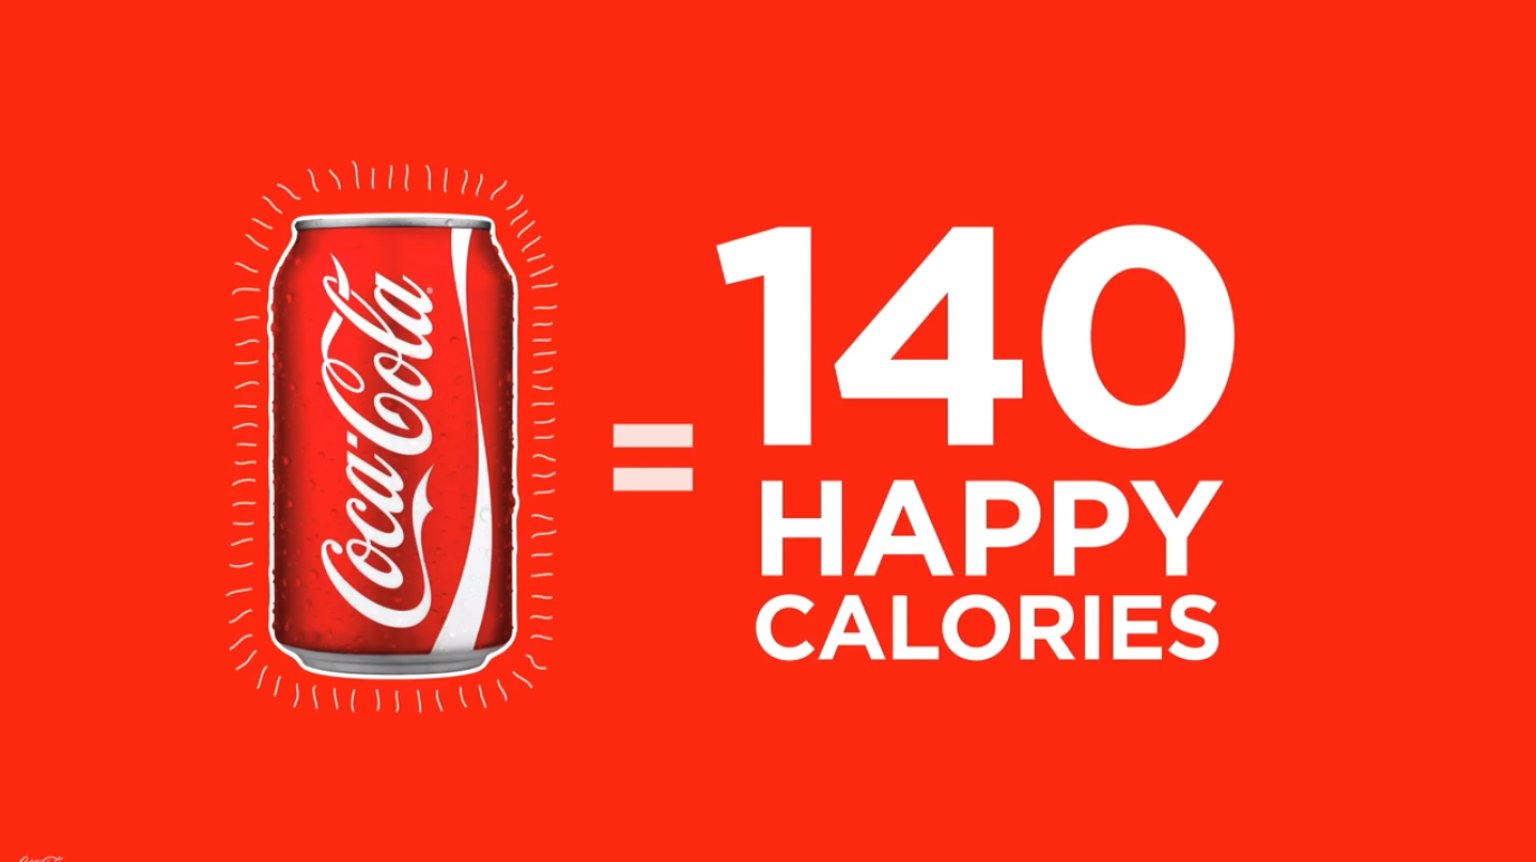 1000 Images About Coca Cola On Pinterest Coca Cola Advertising Campaign And Ad Campaigns